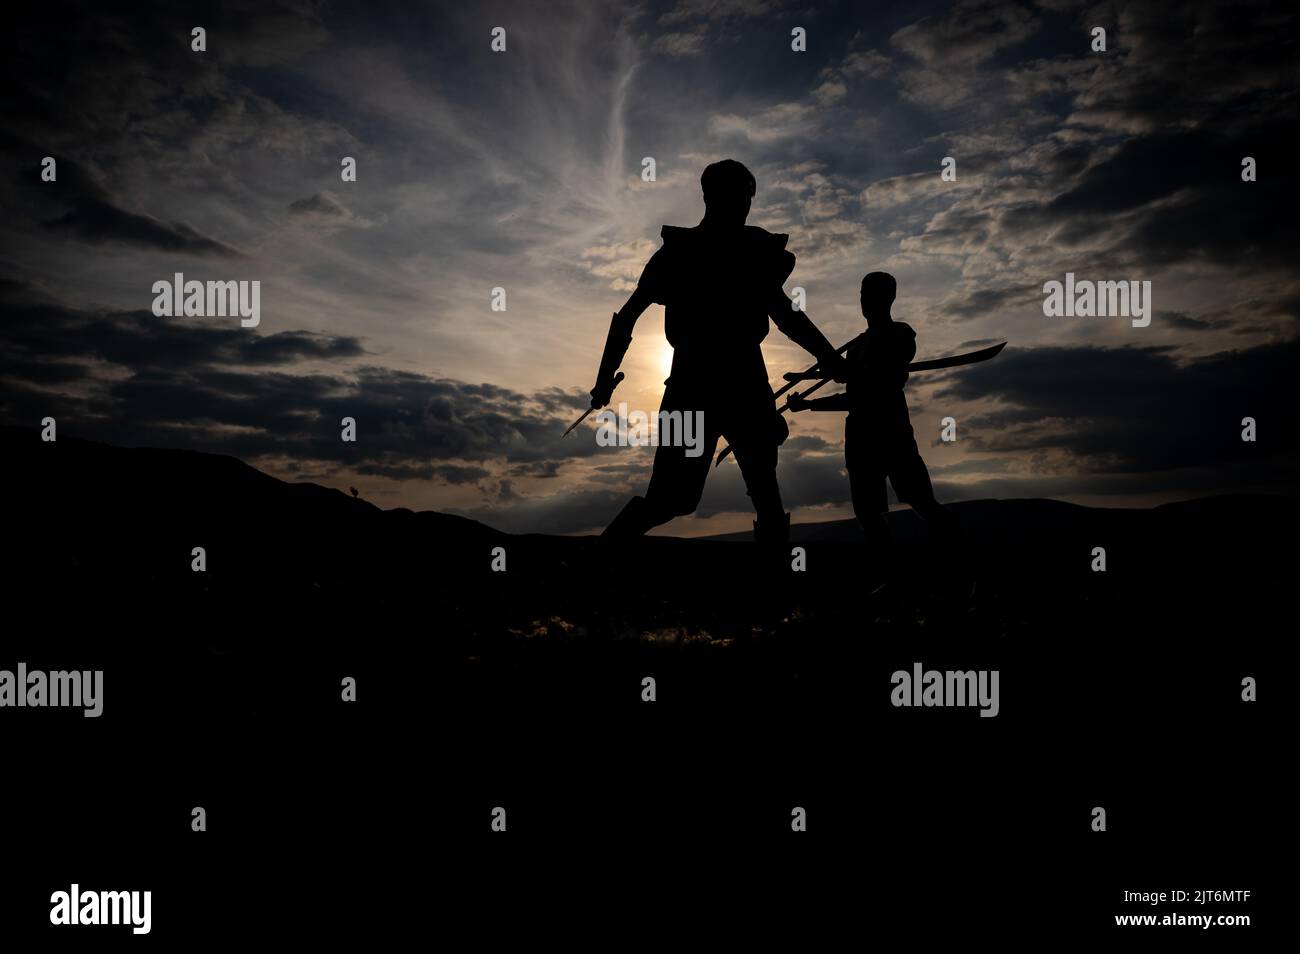 Martial arts sword fighting silhouettes at sunset Stock Photo - Alamy